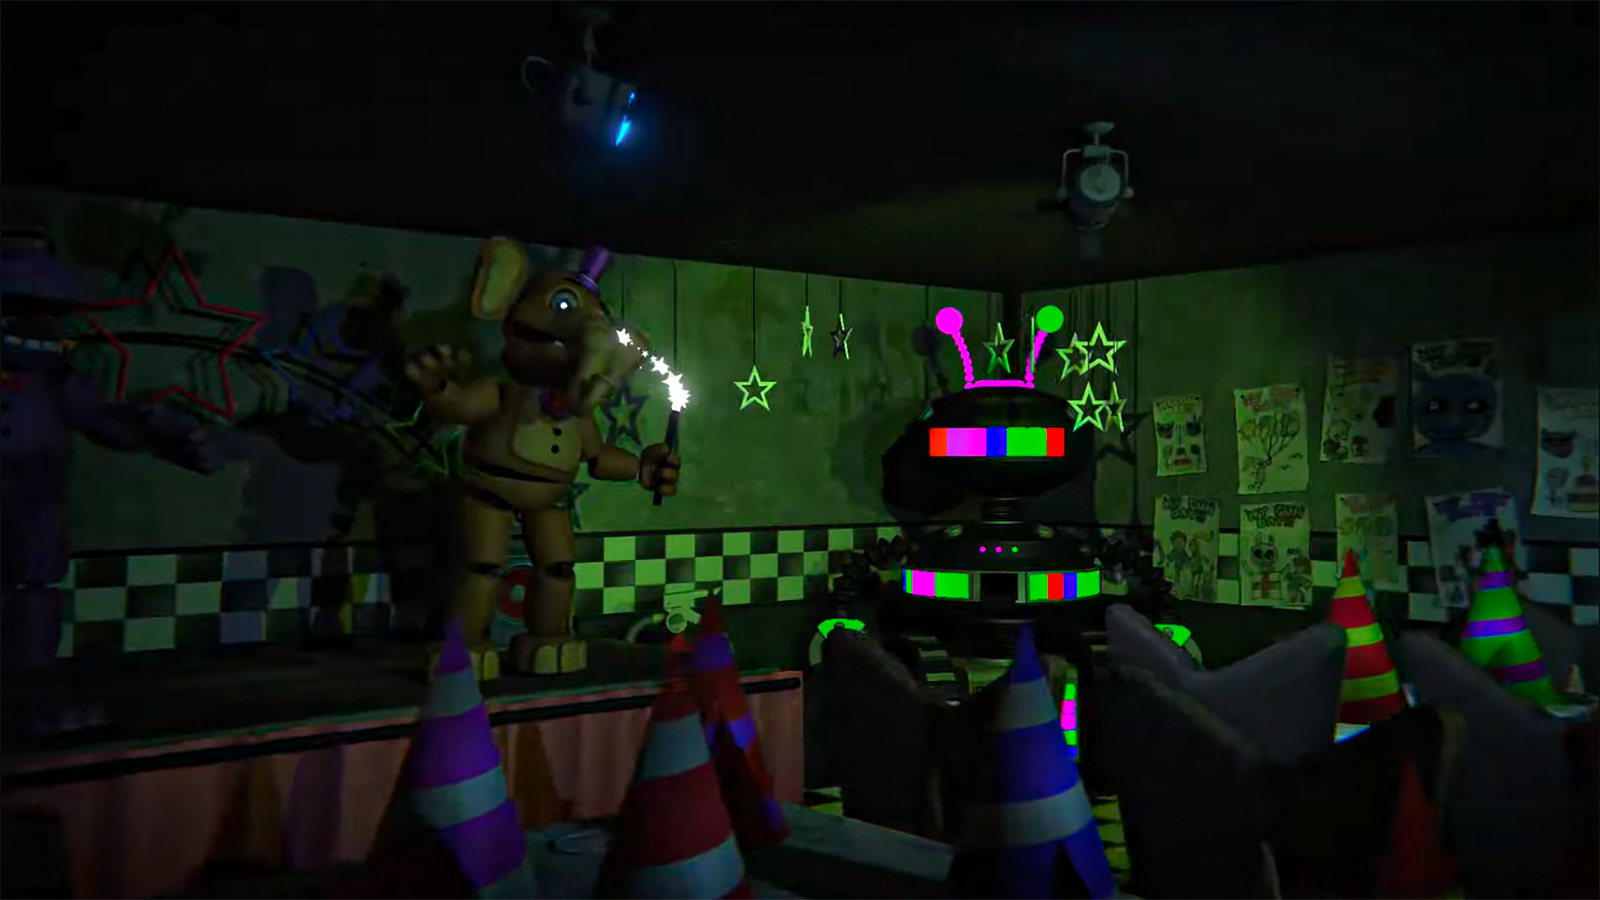 Screenshot 1 of The Glitched Attraction FNAF 1.1